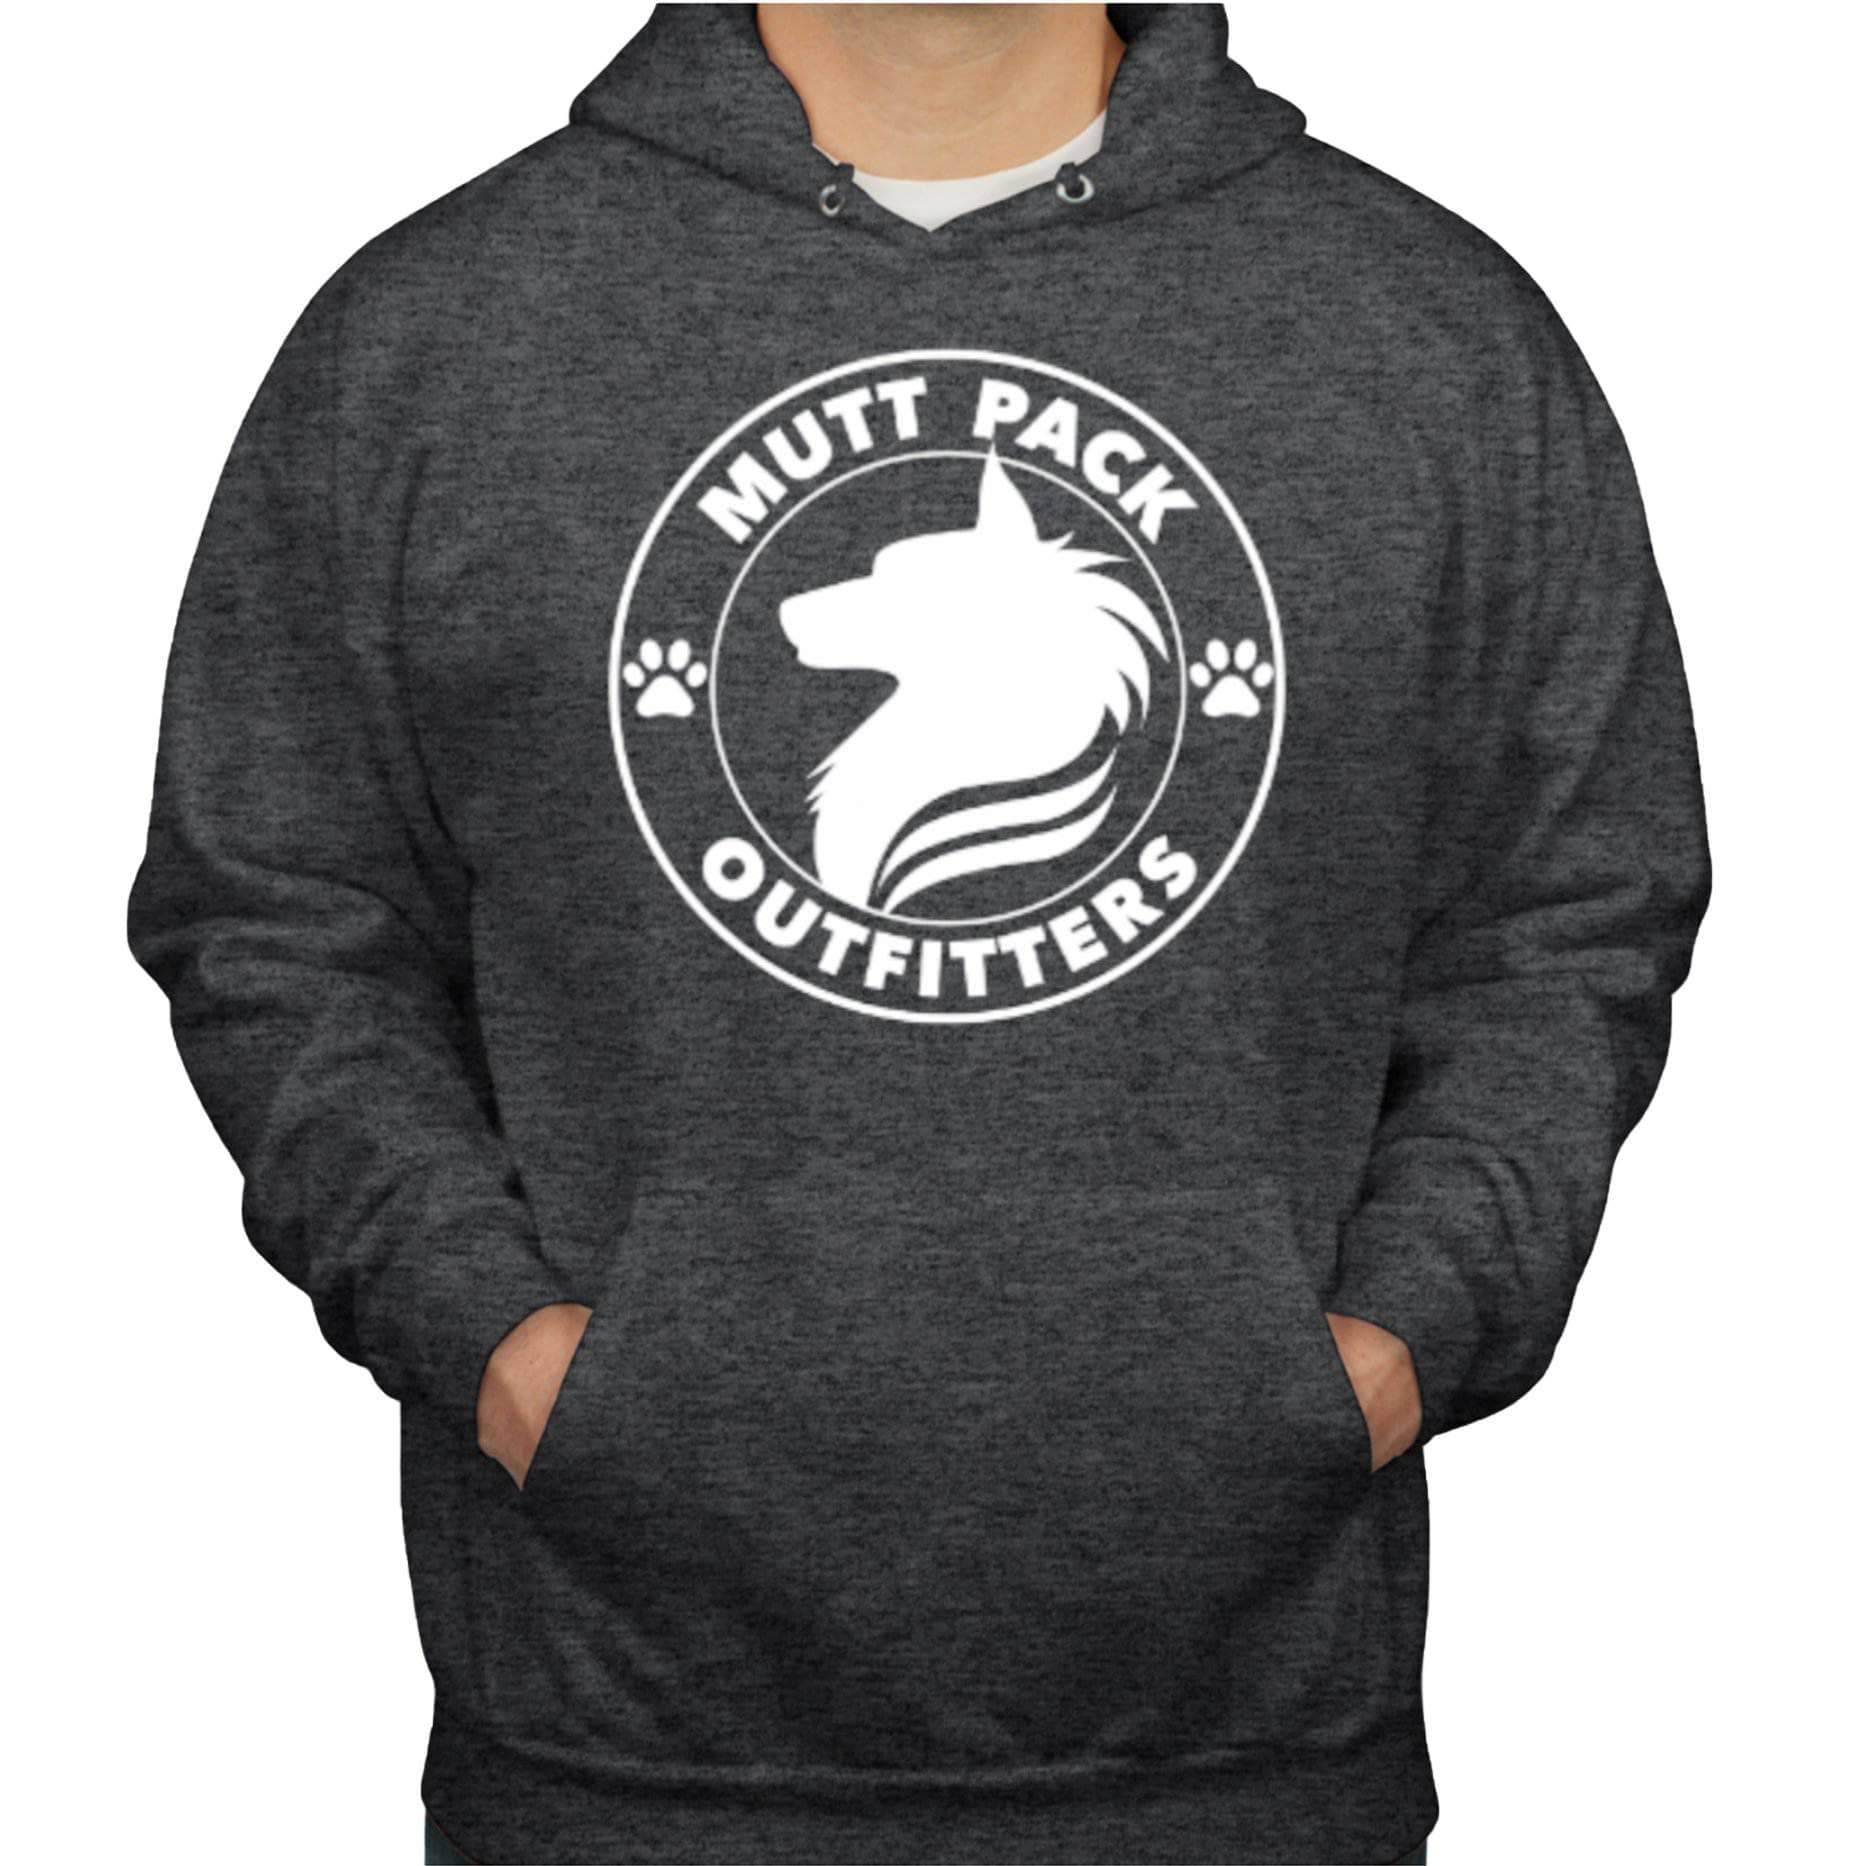 Mutt Pack Hoodie - Charcoal Attire - Mutt Pack Outfitters 